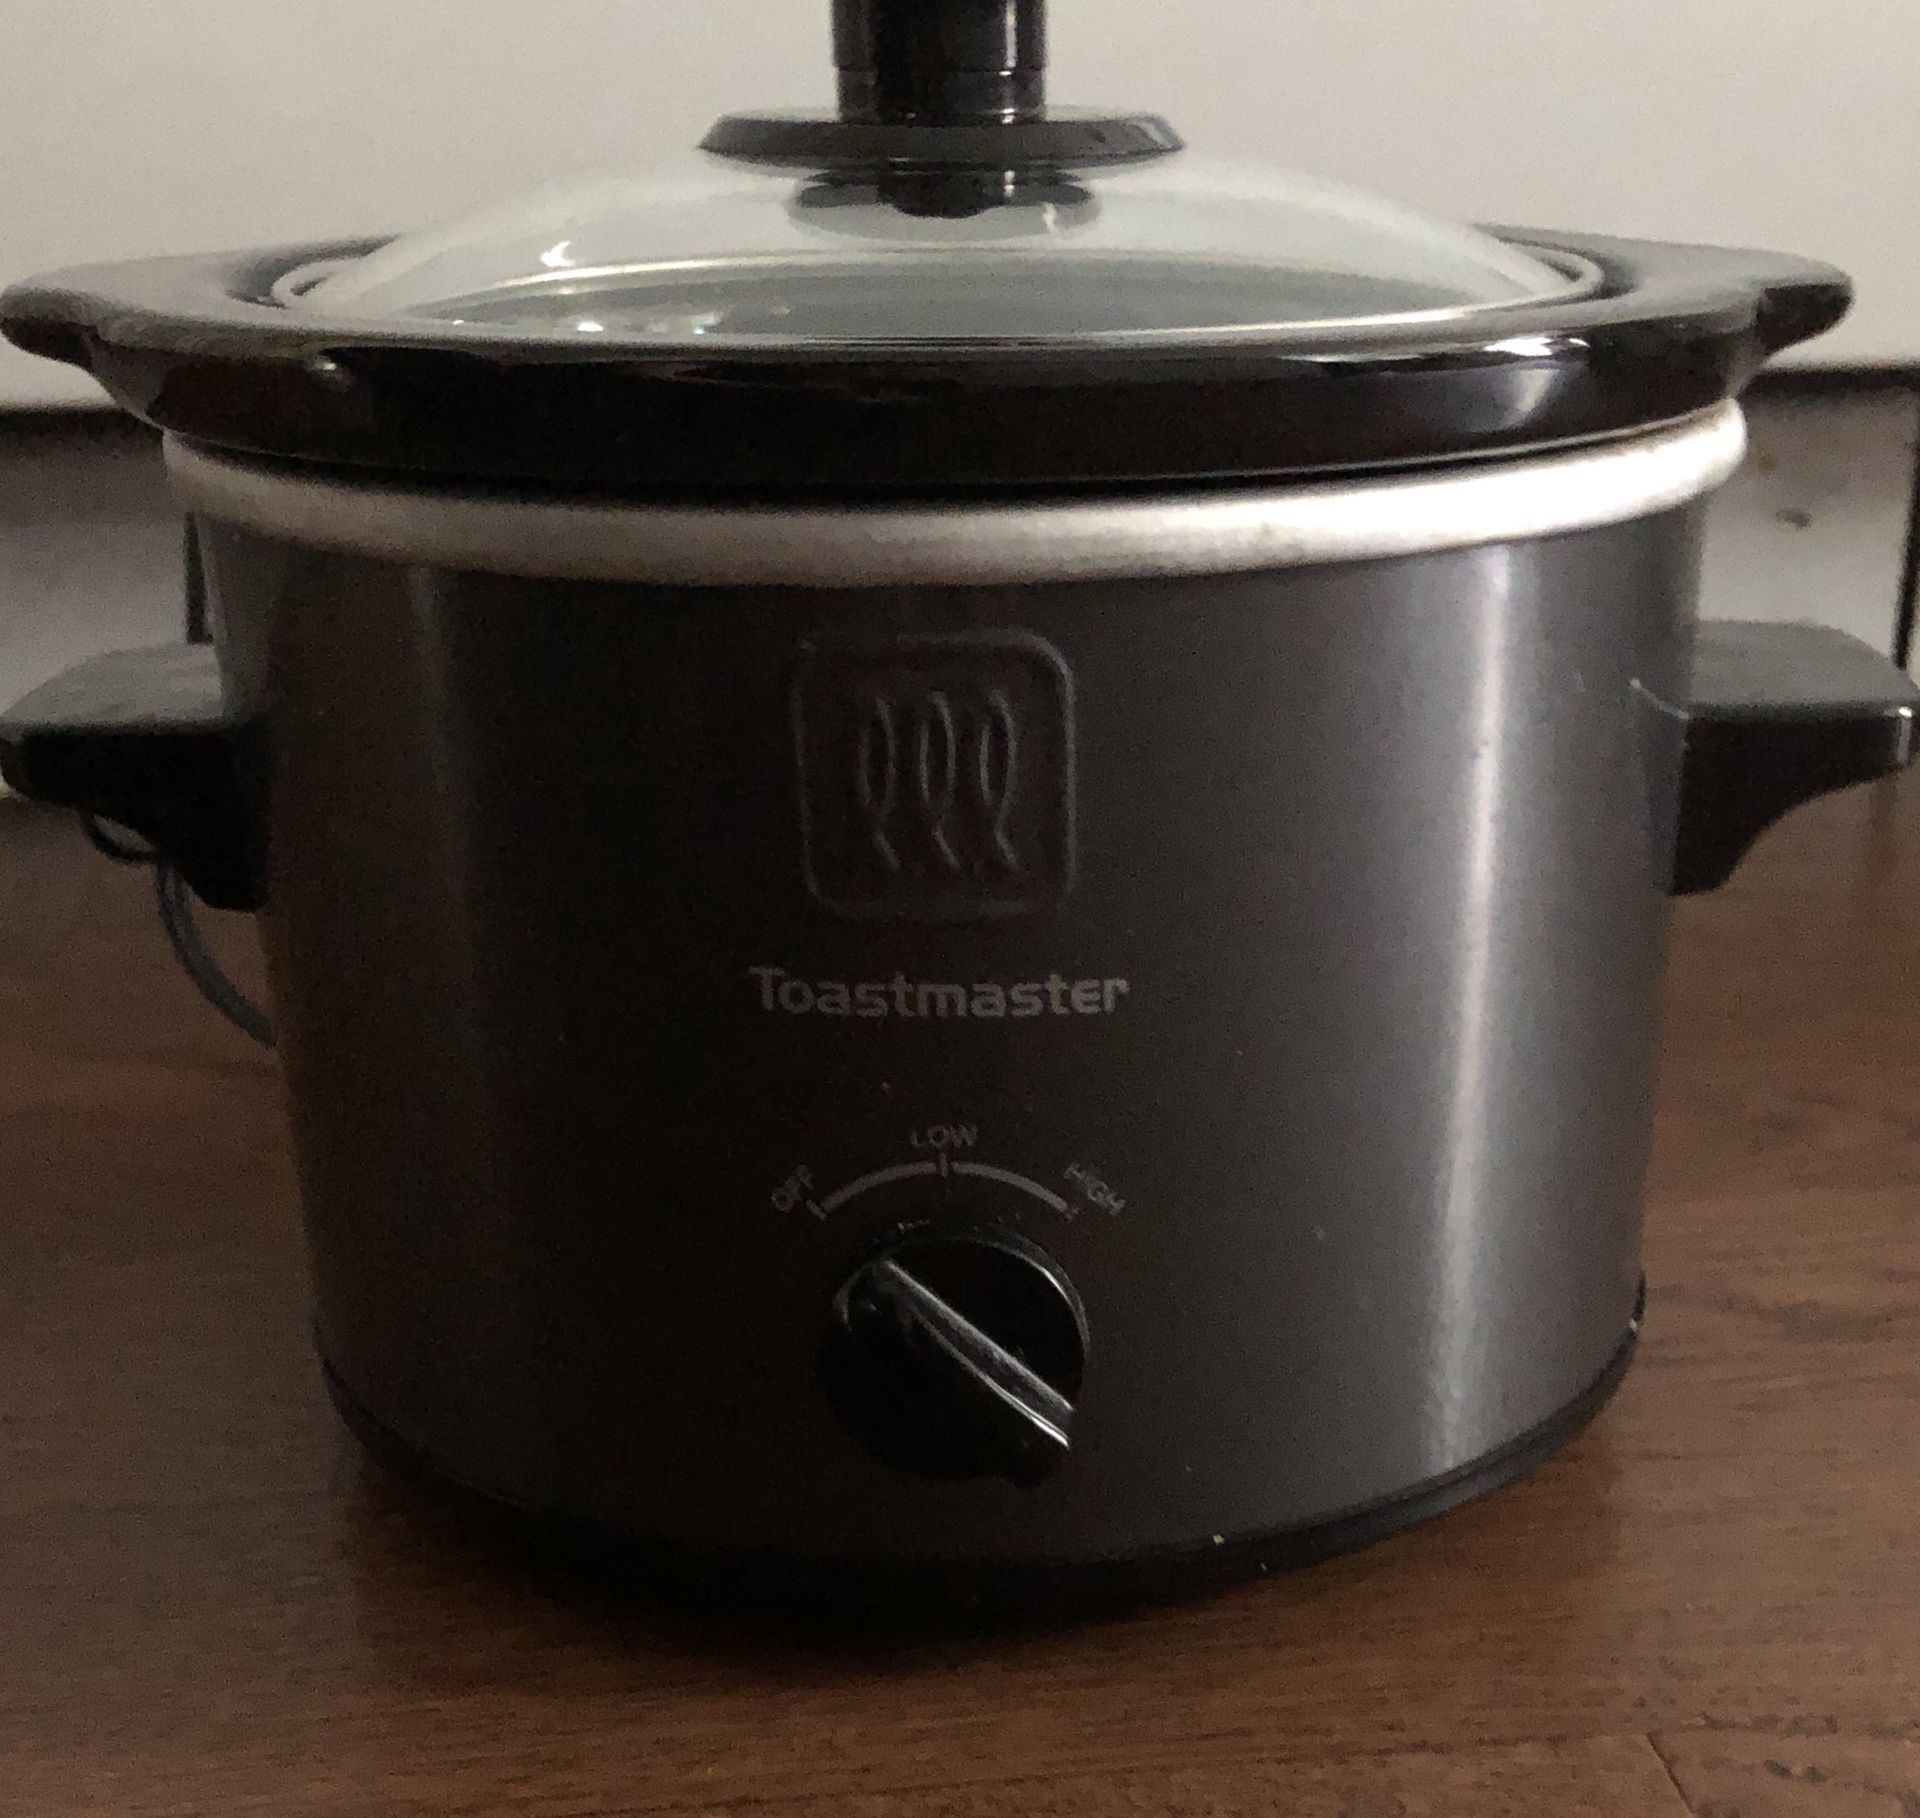 Super Sunday $10 Special: TOASTMASTER Charcoal Gray Mini Small Crock Pot Slow Cooker Model TM-151SC